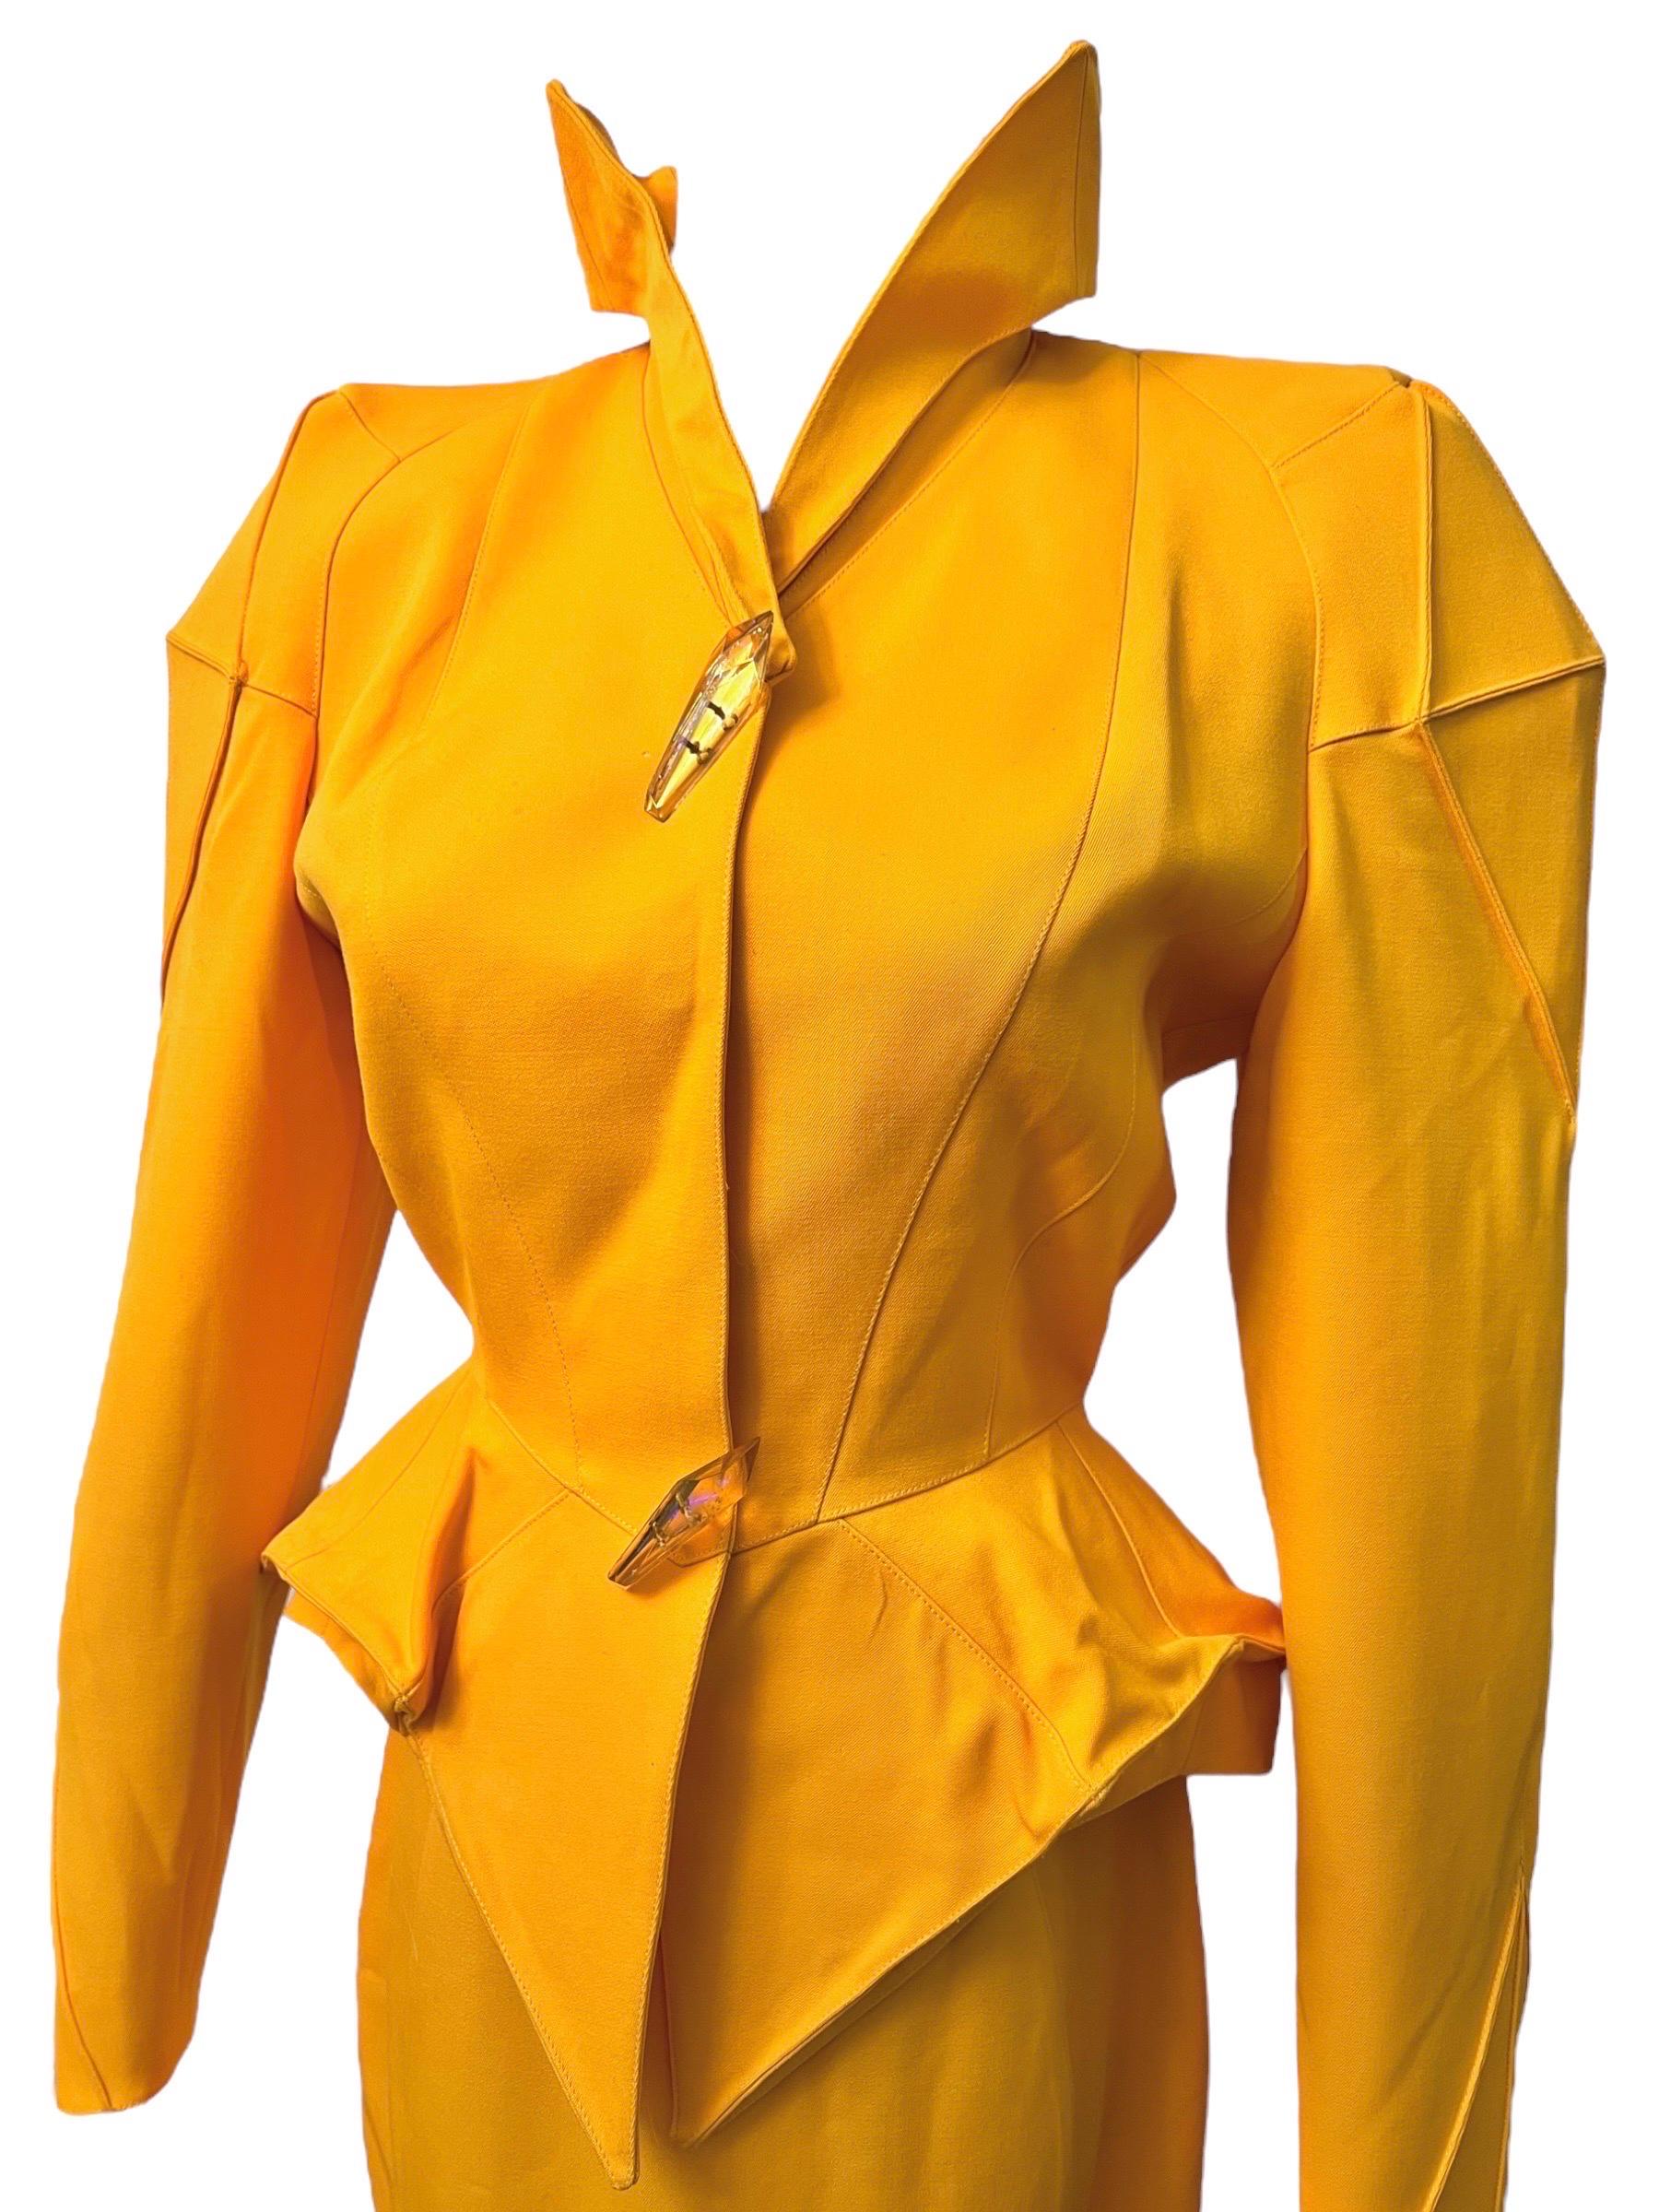 F/W 1991 Thierry Mugler Yellow Sculptural Skirt Suit For Sale 6